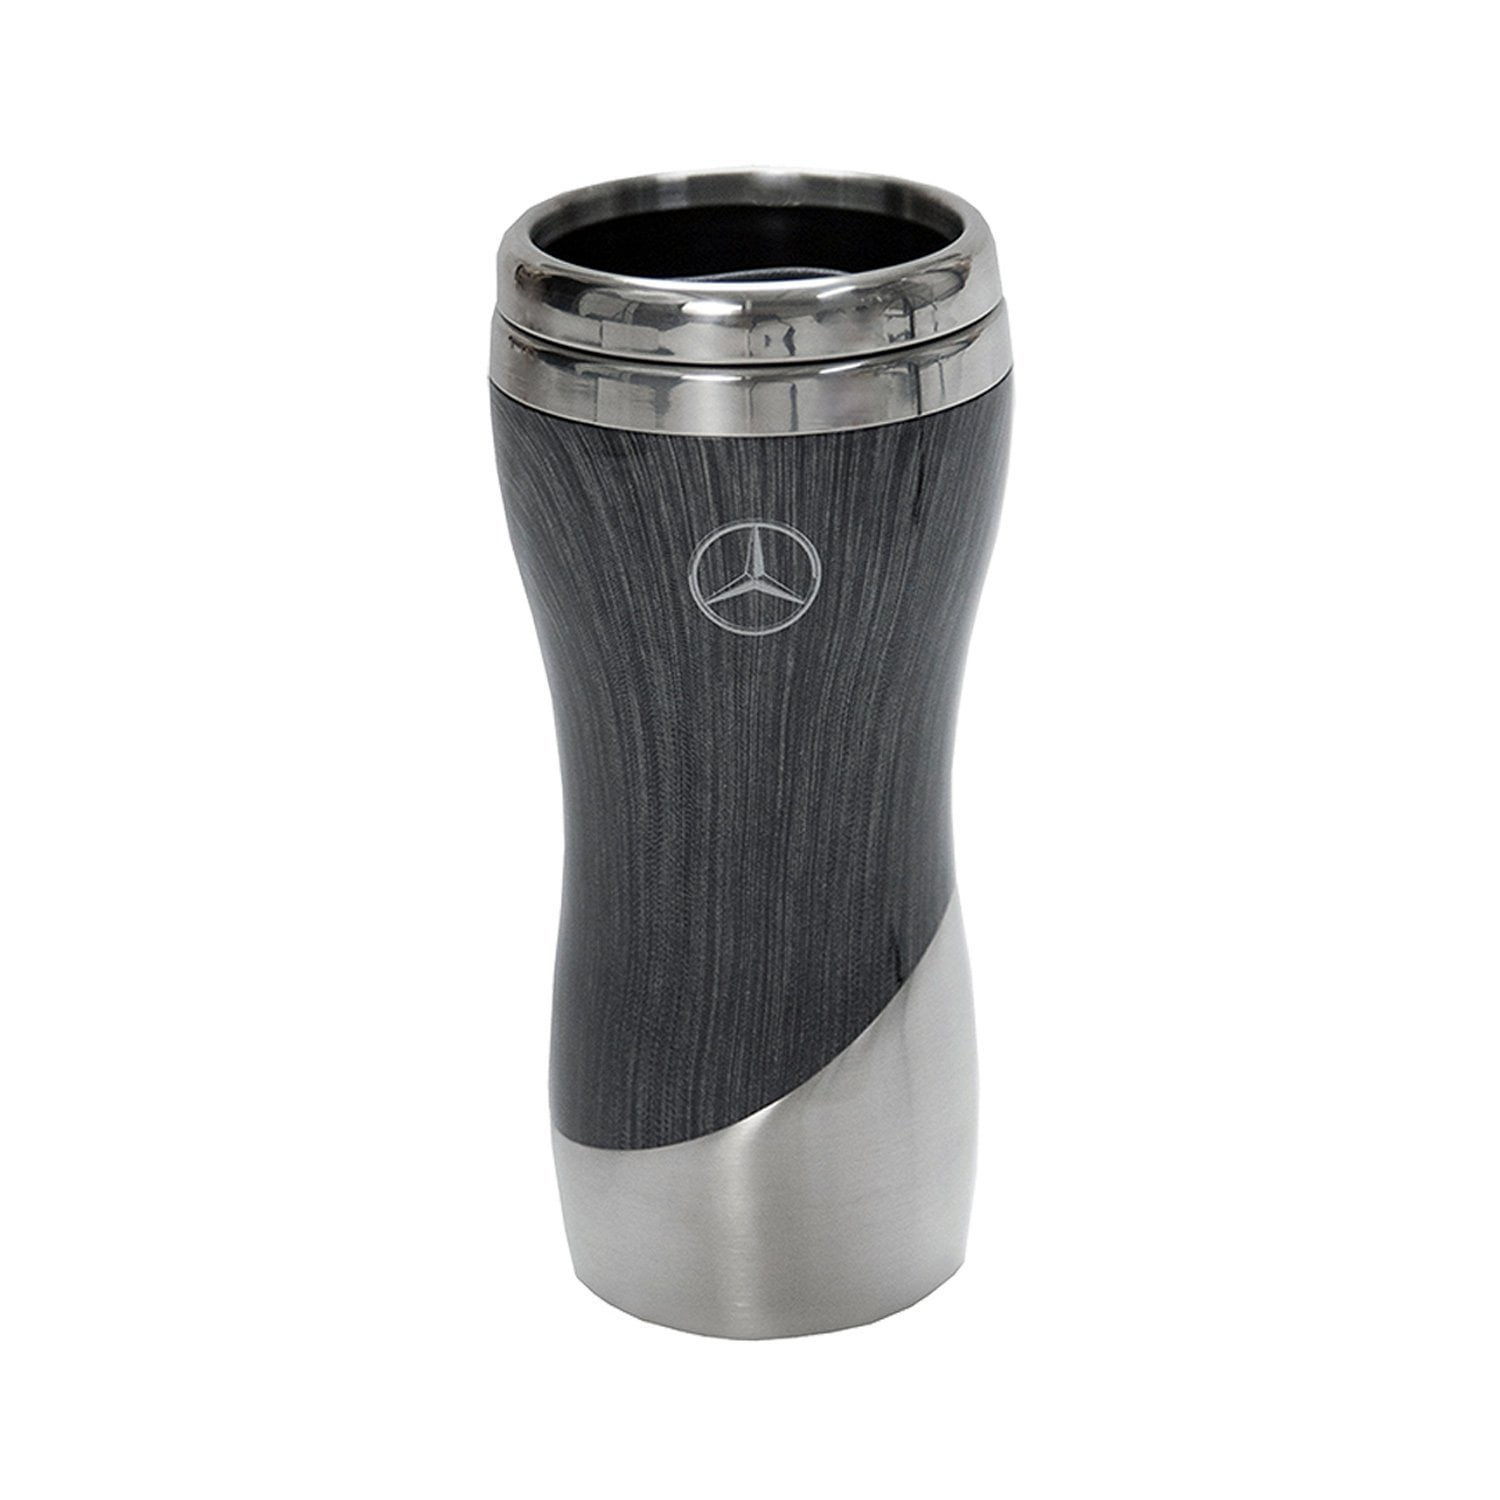 Mercedes-Benz - ☕️ What about a mug for your daily coffee